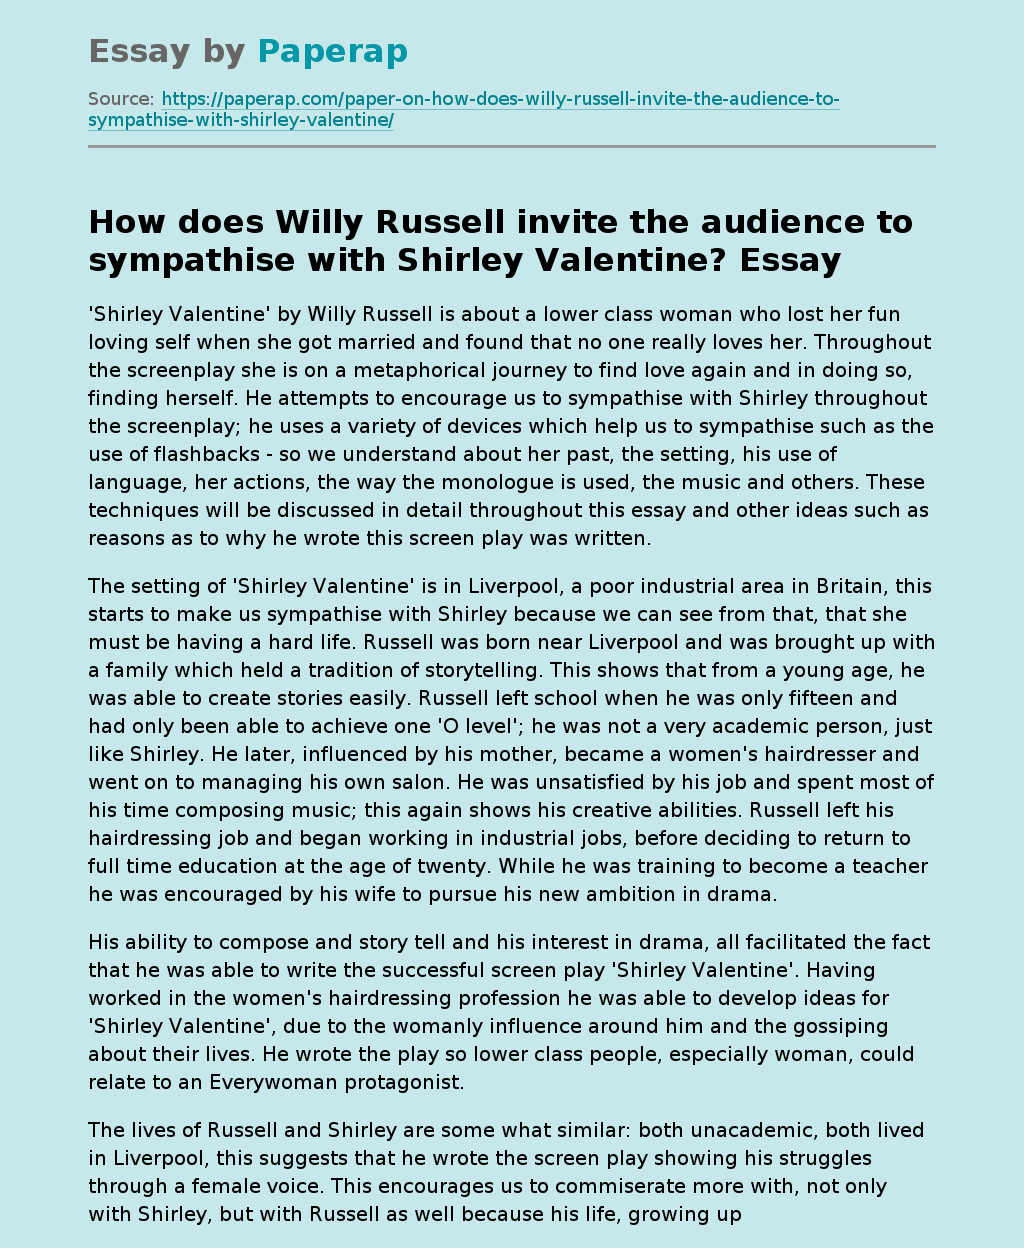 How Does Willy Russell Invite the Audience to Sympathise With Shirley Valentine?